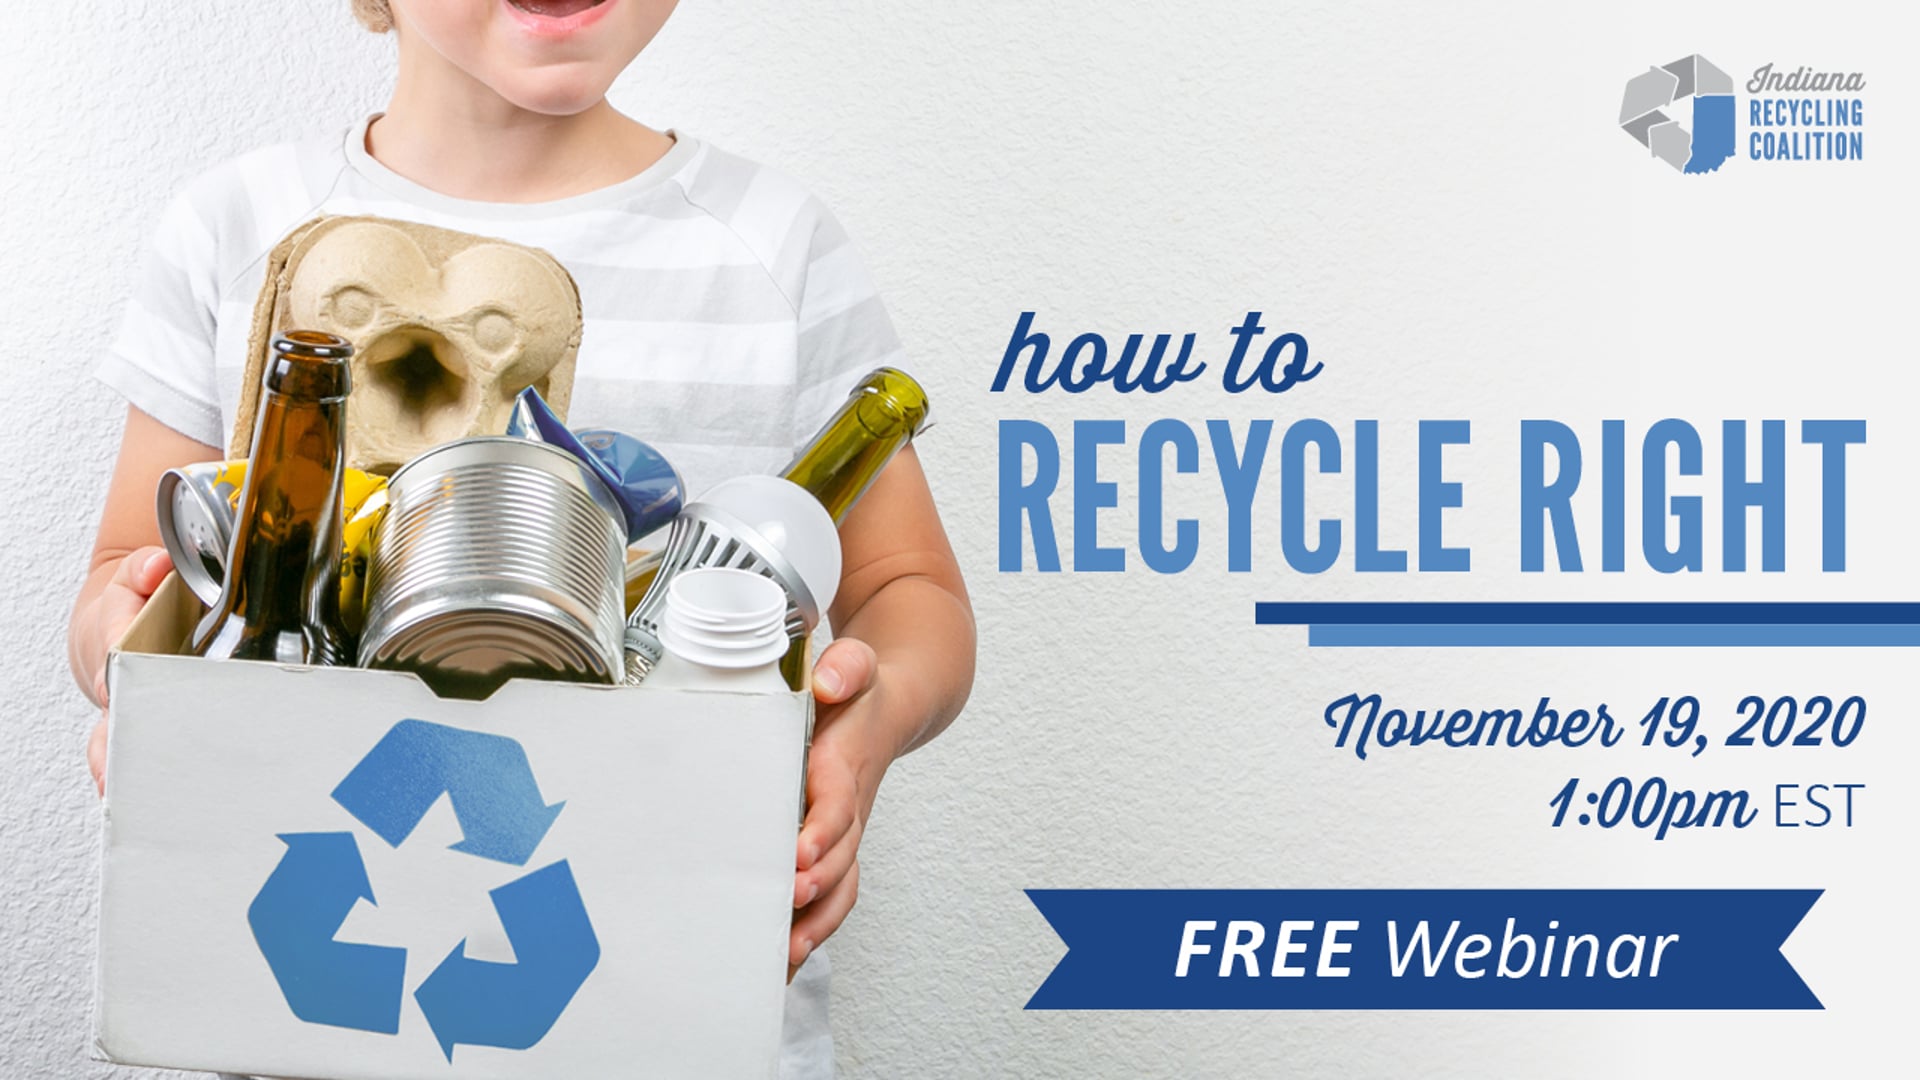 How to Recycle Right Webinar